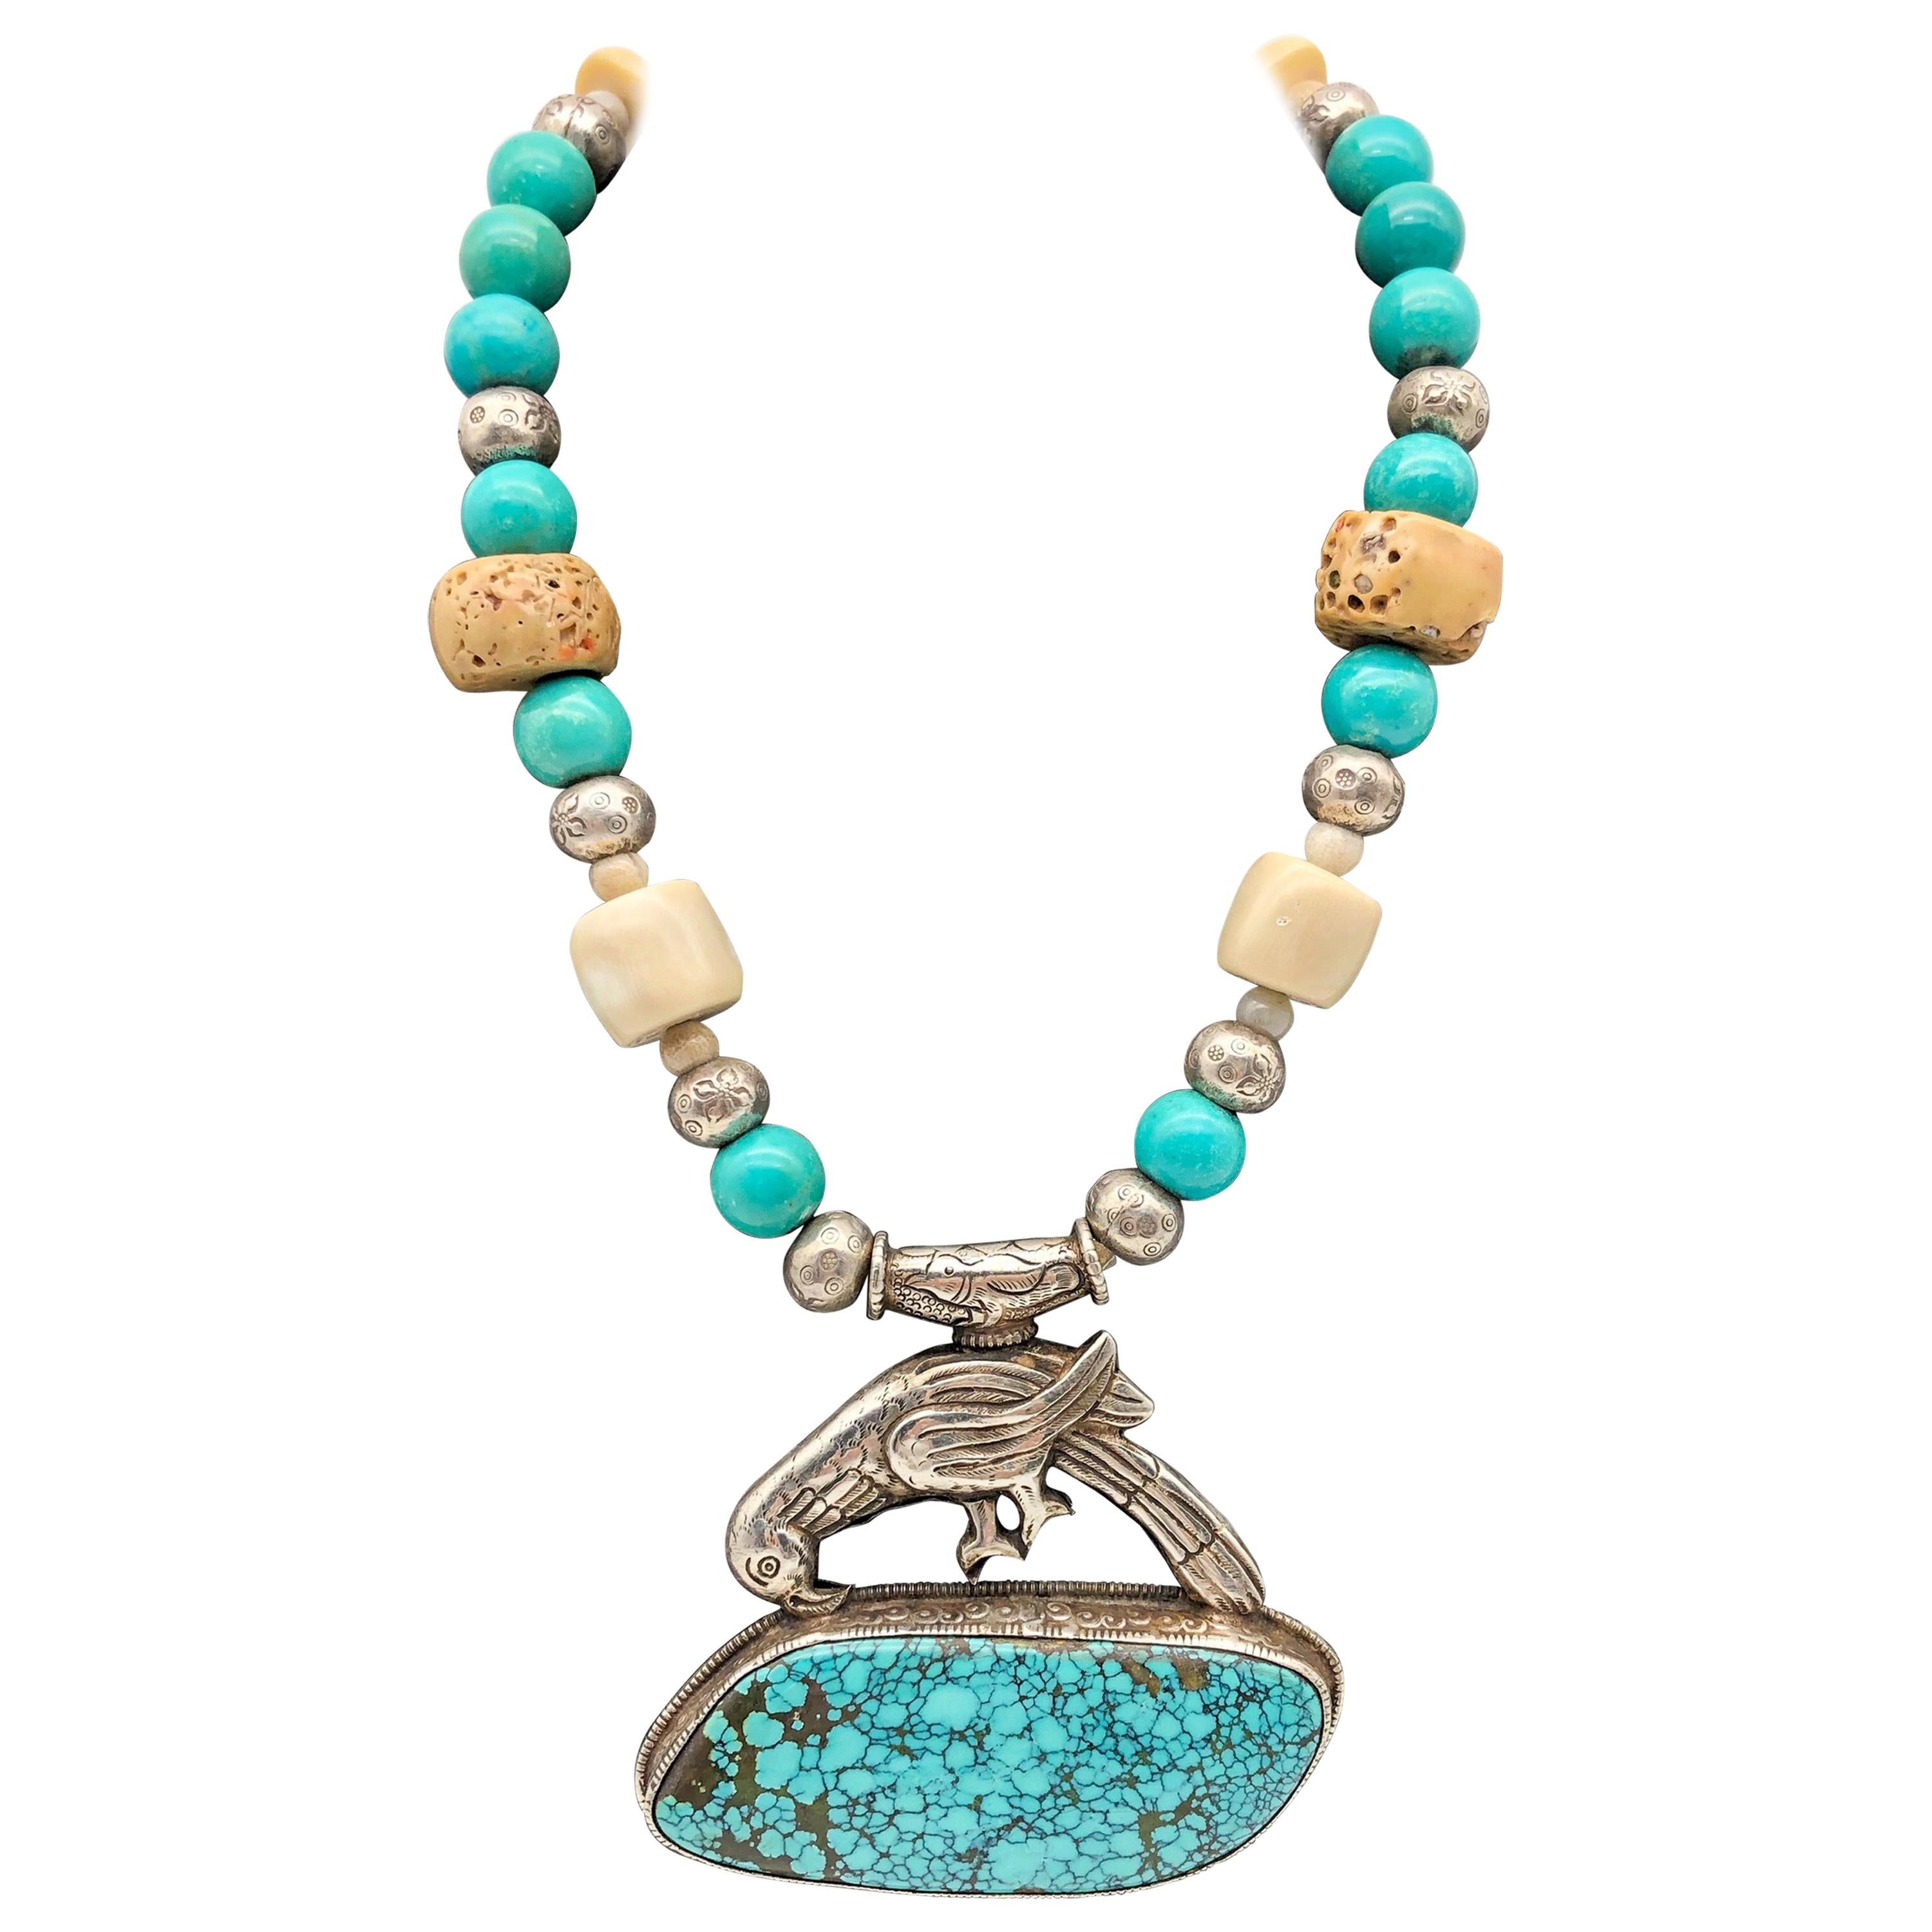 A.Jeschel Turquoise and Ethnic beads necklace with Tibetan Silver Bird Pendant   For Sale